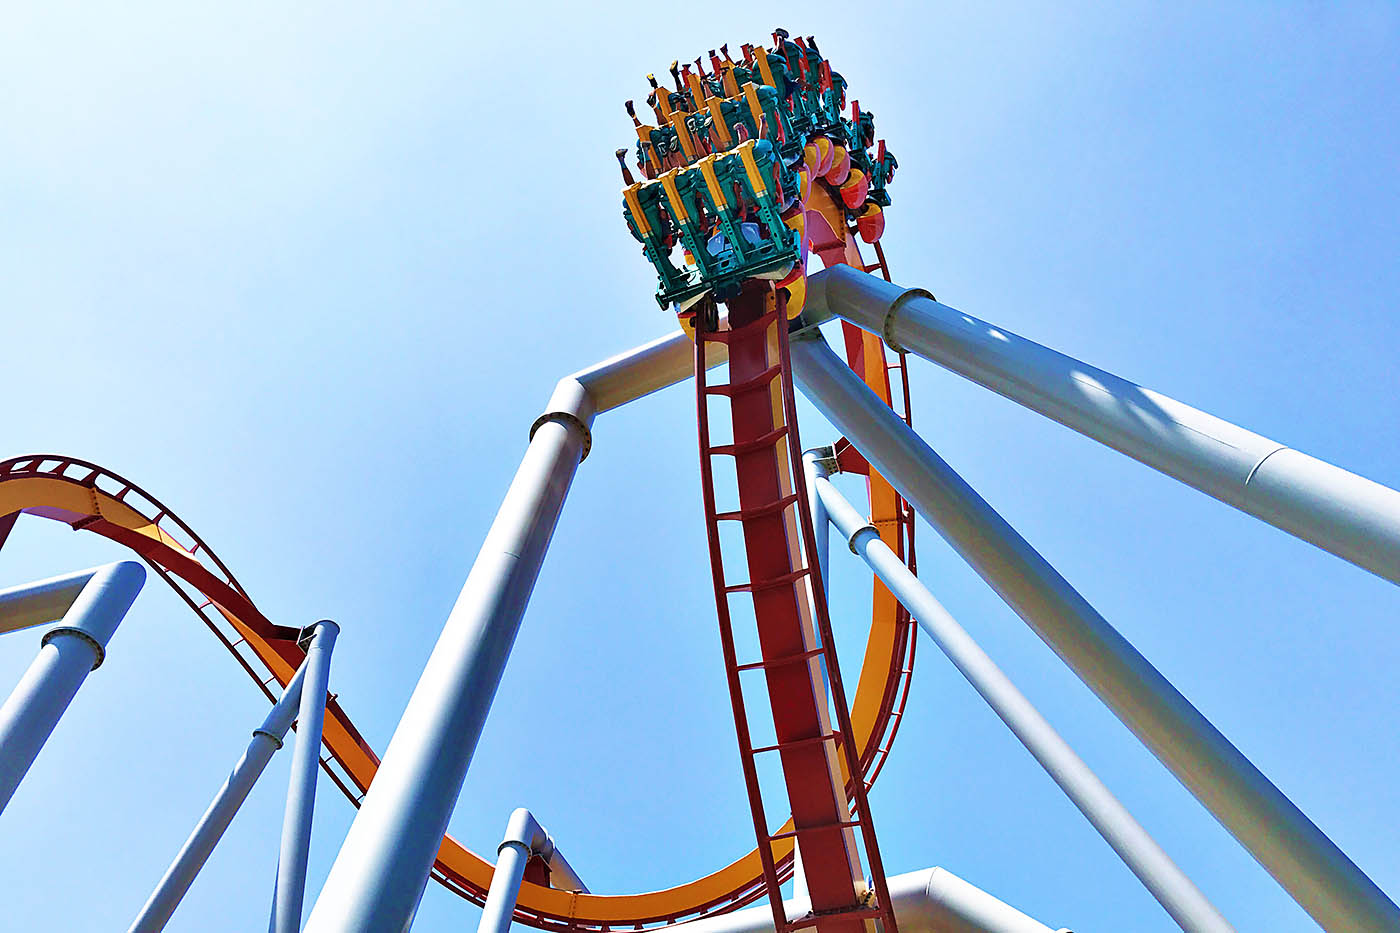 Tips for visiting Knott's Berry Farm AND Soak City in 1 day!